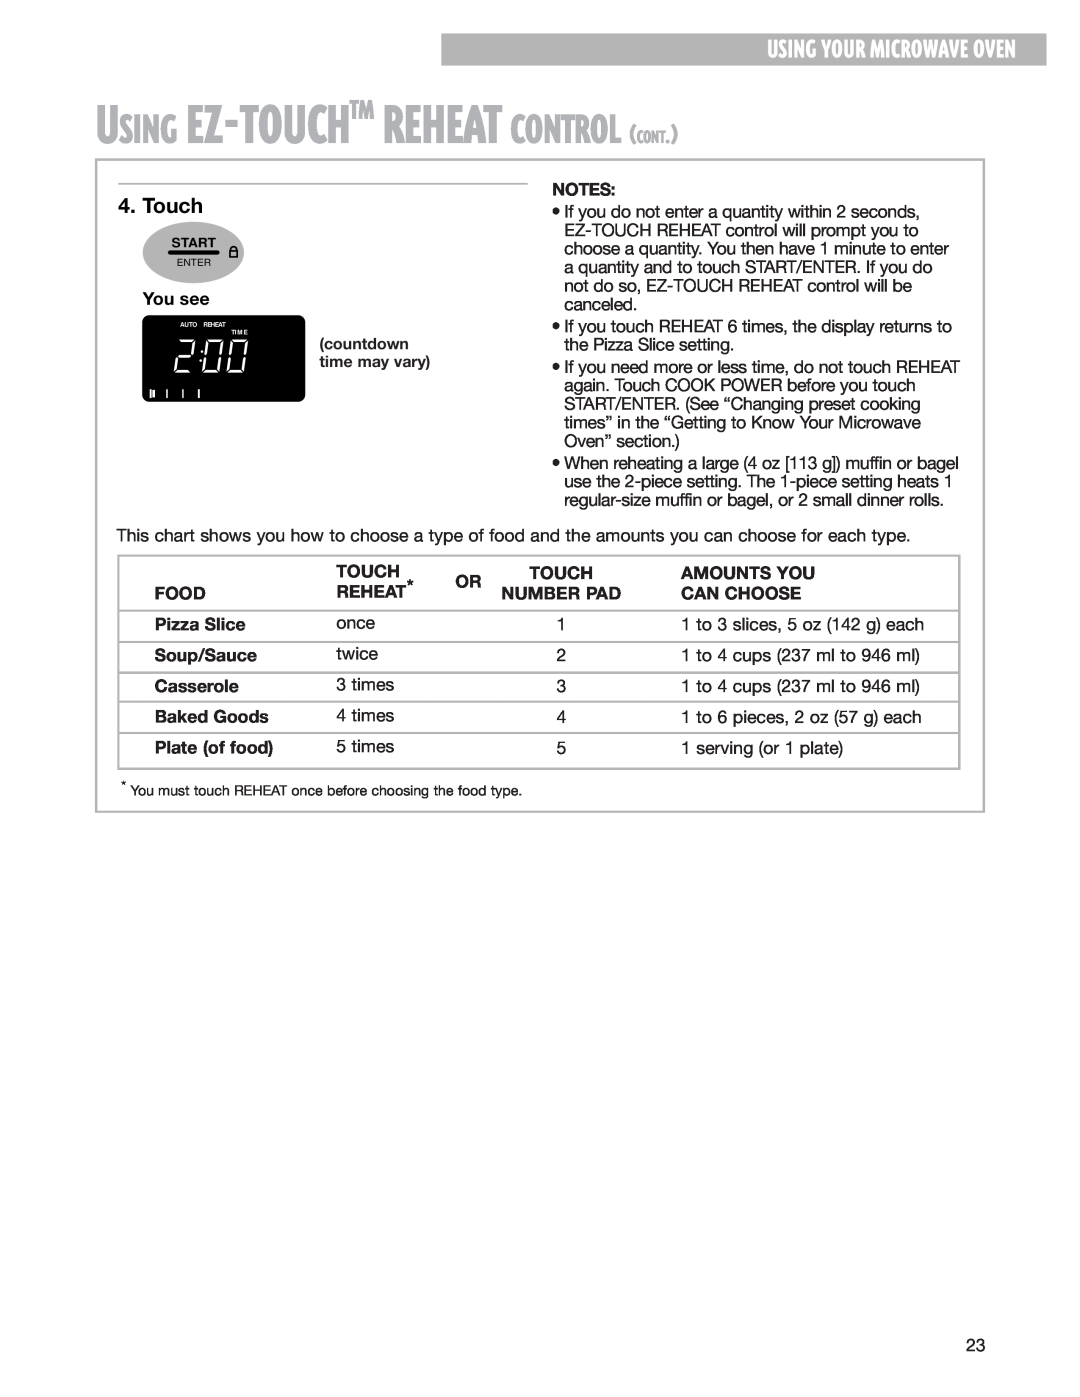 Whirlpool MH8150XJ installation instructions Using Ez-Touchtm Reheat Control Cont, Using Your Microwave Oven 